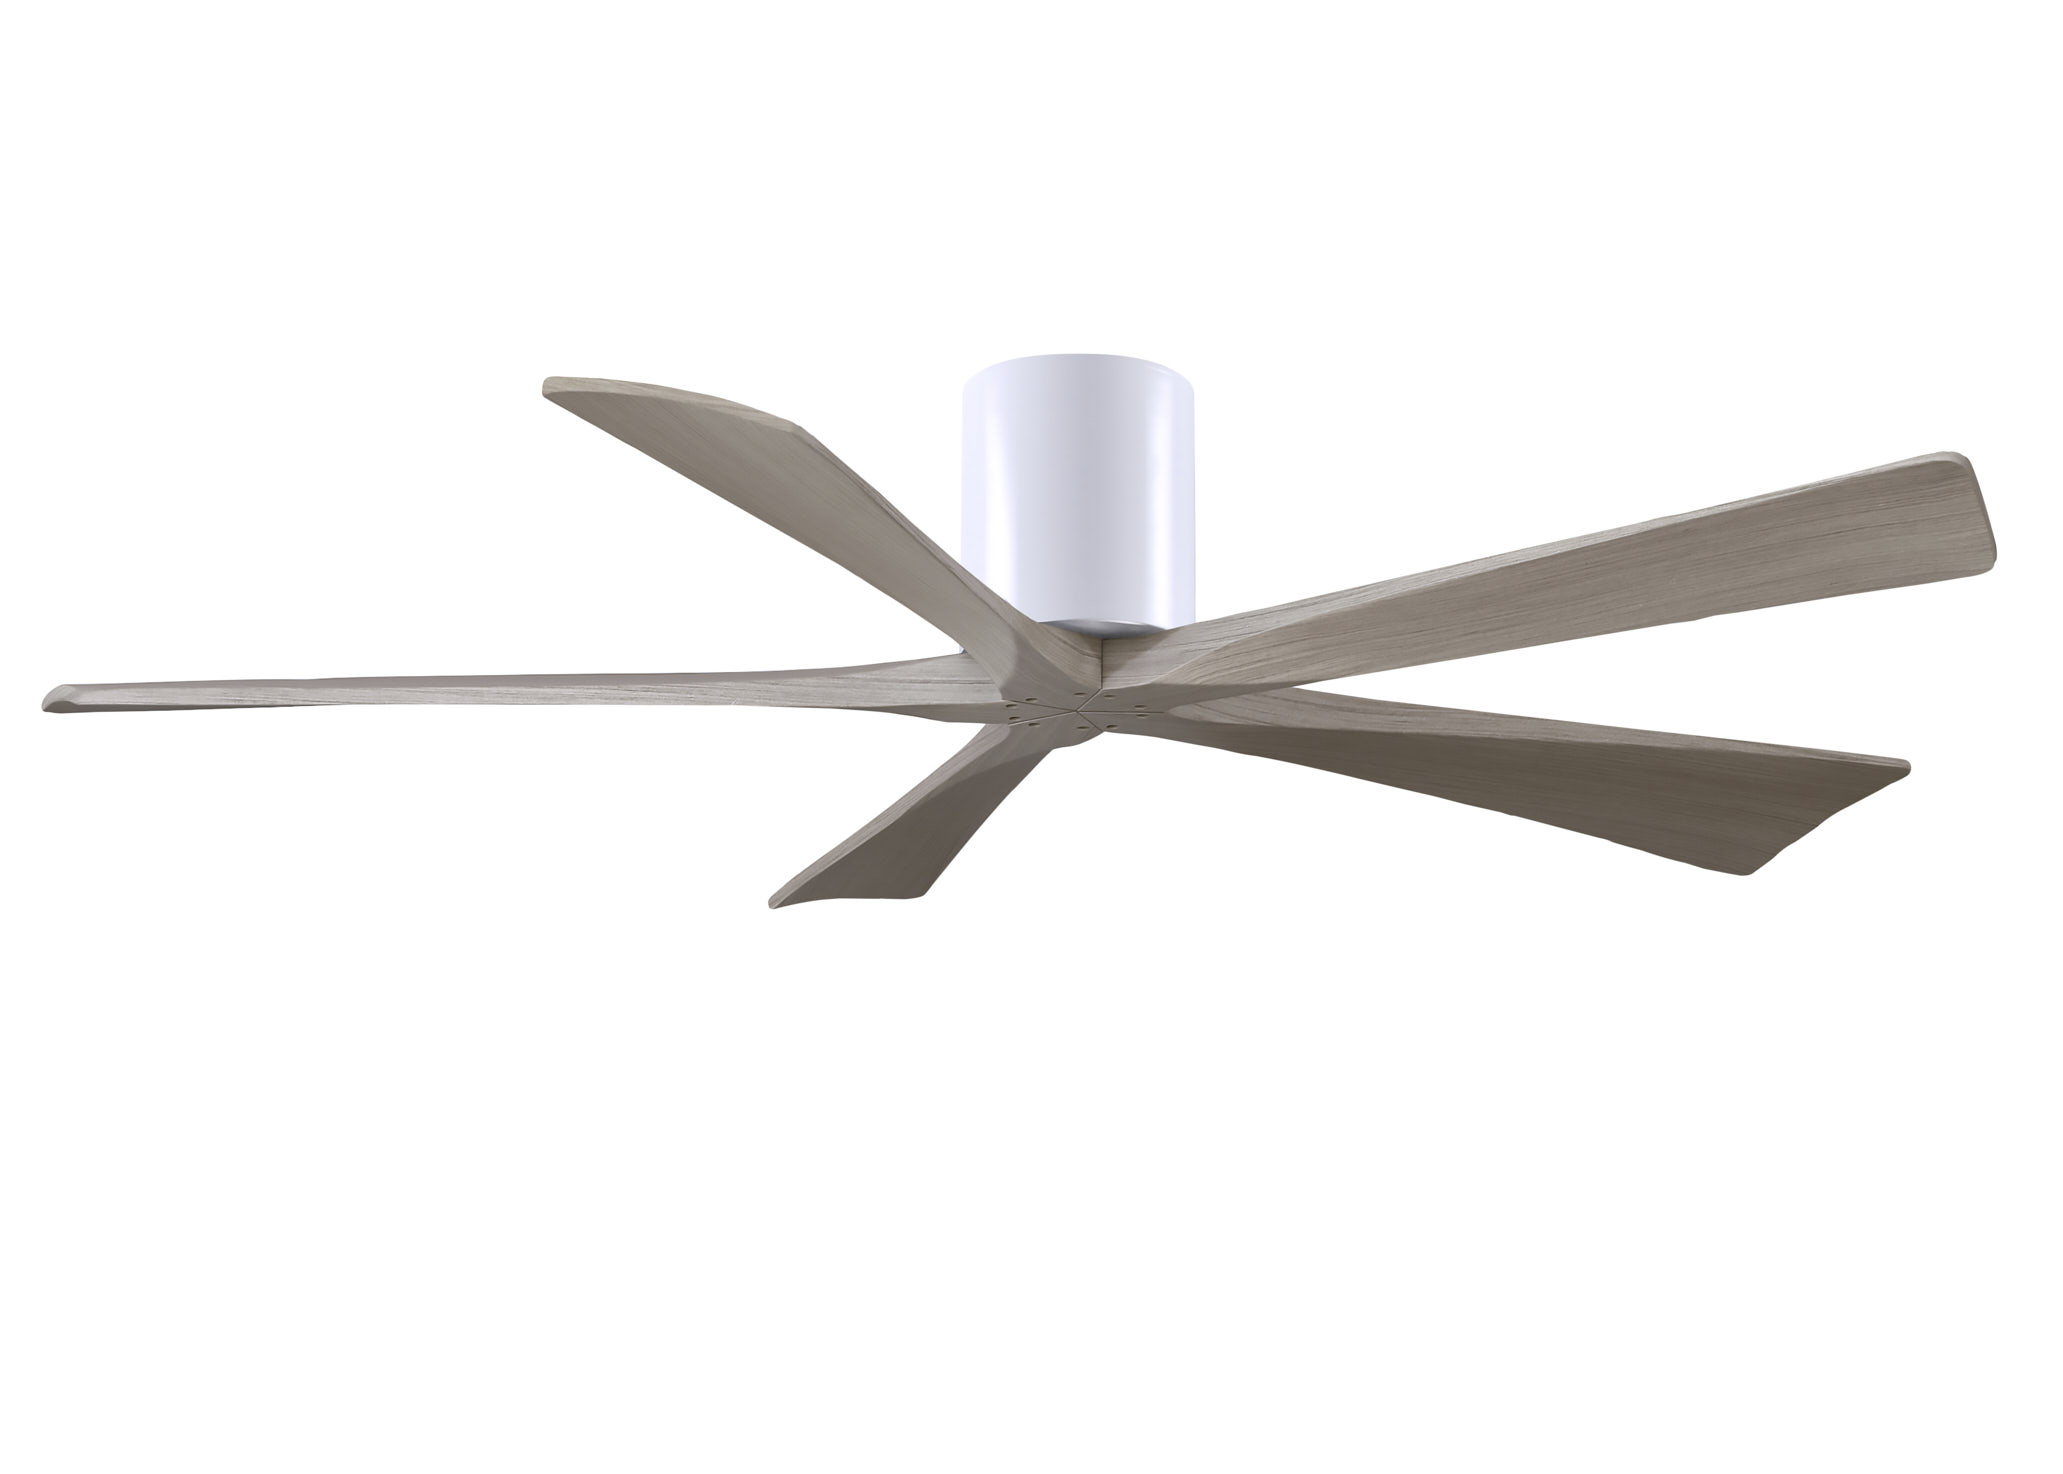 Irene-5H 6-speed ceiling fan in gloss white finish with 60